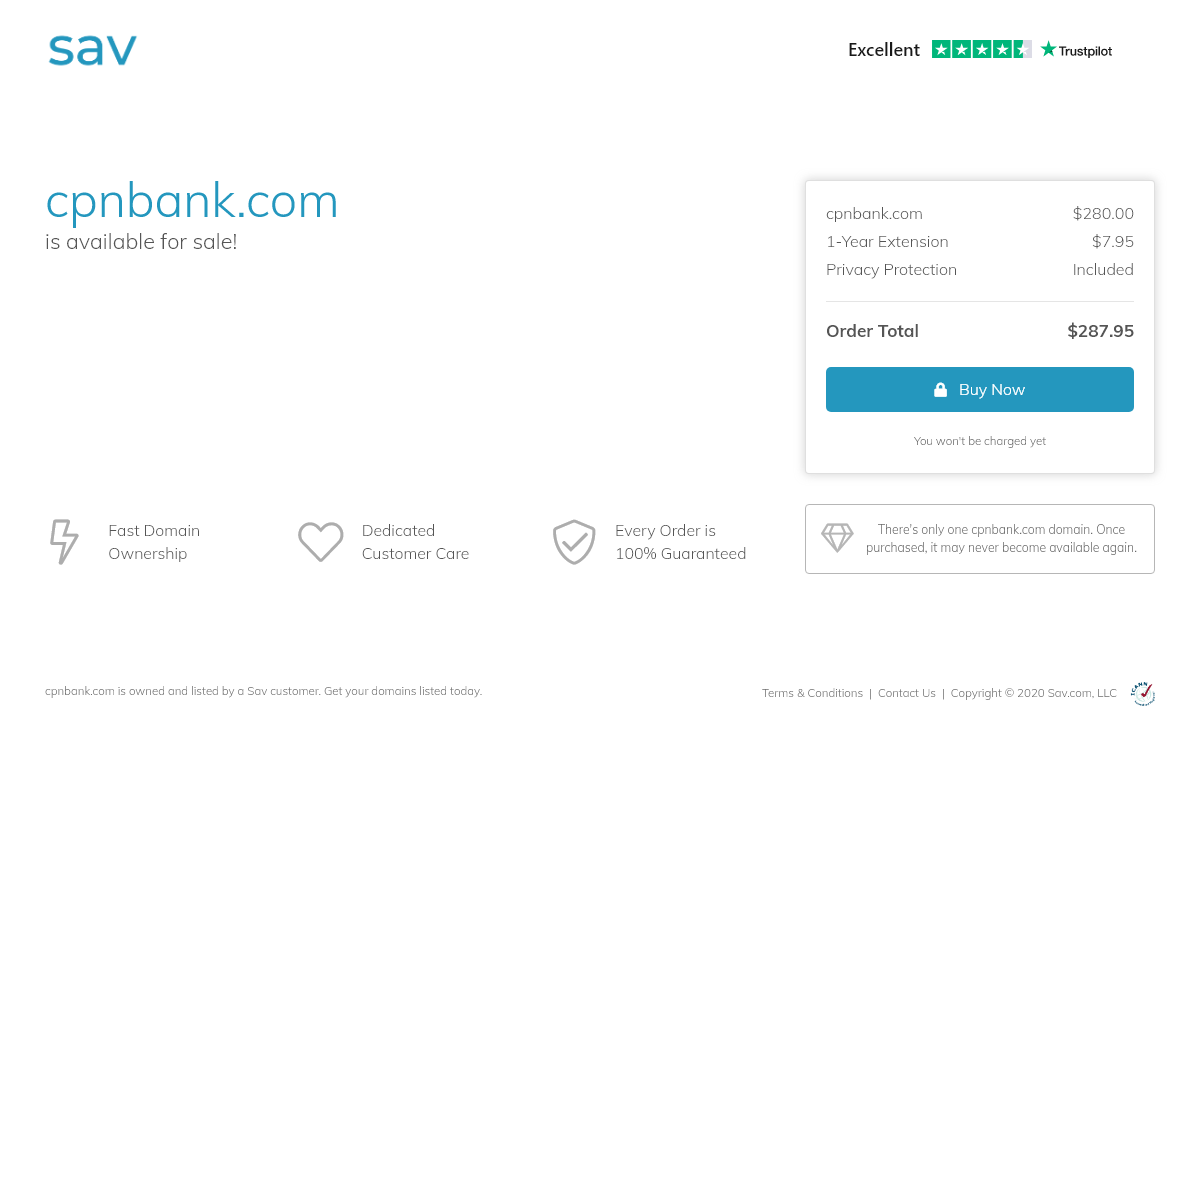 A complete backup of cpnbank.com